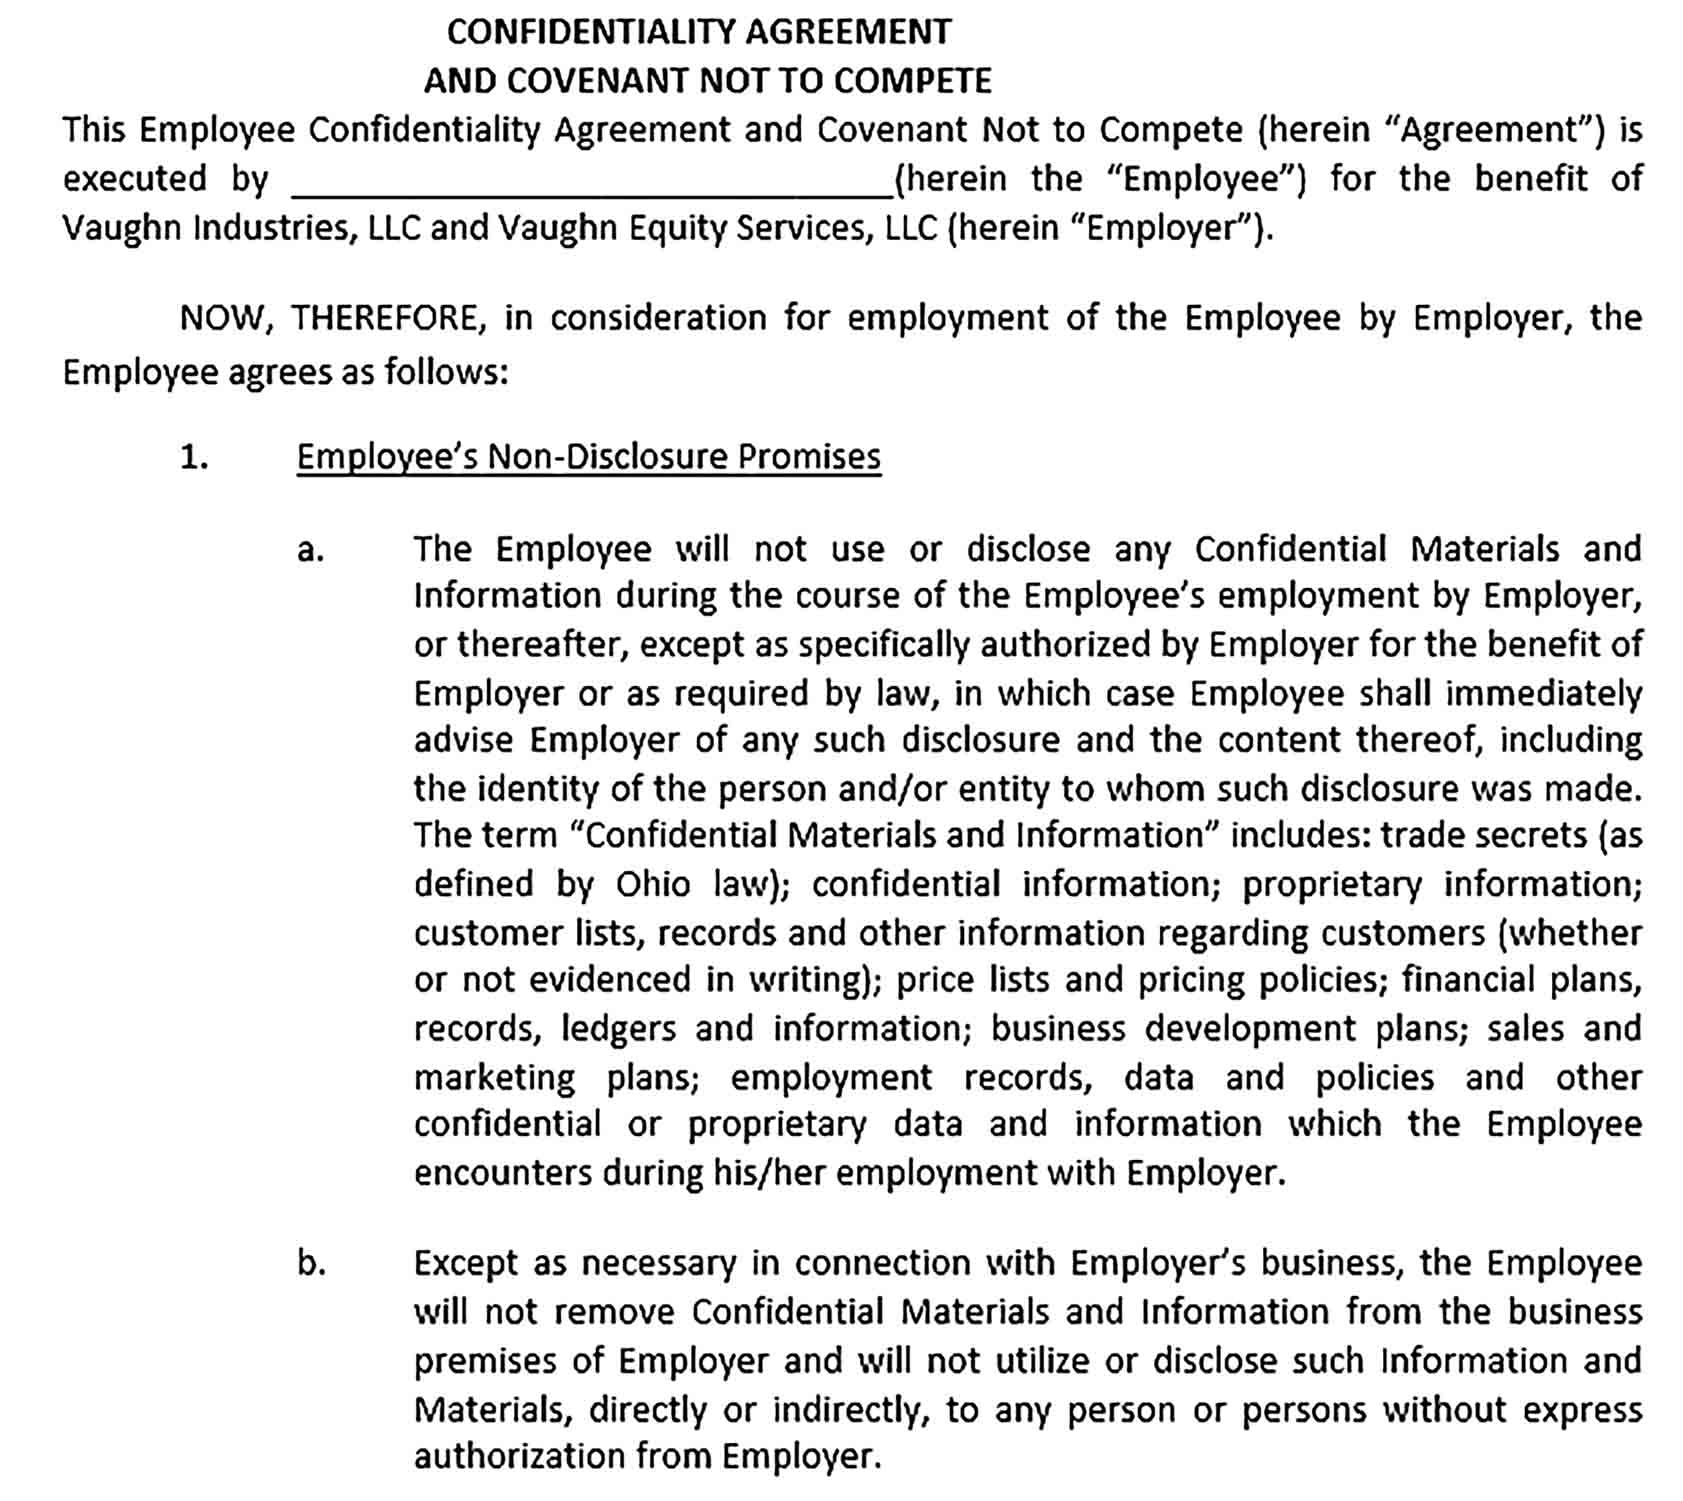 Sample Employee Confidentiality Agreement 001